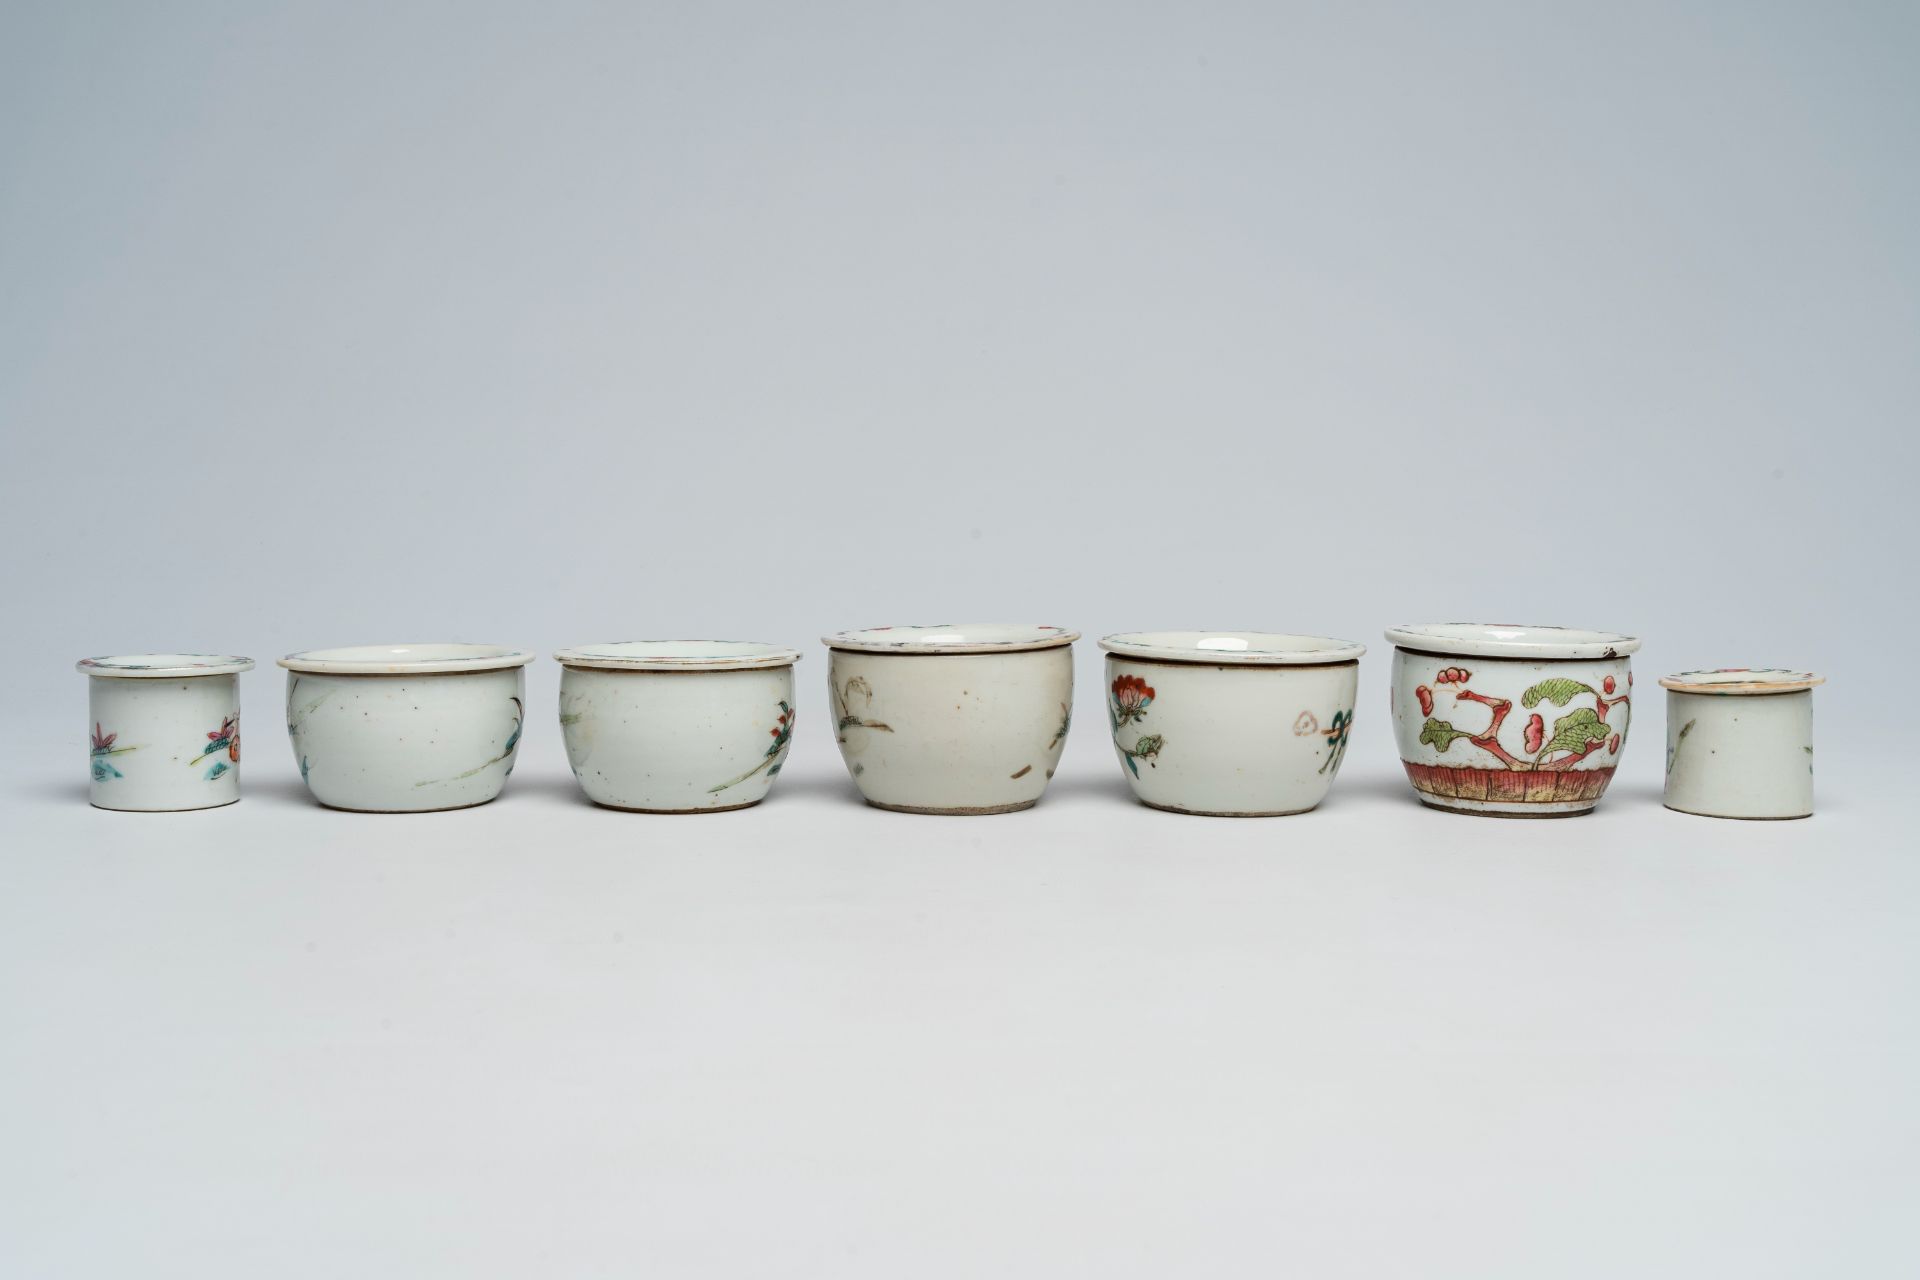 A varied collection of Chinese famille rose porcelain with figures and floral design, 19th/20th C. - Image 10 of 13